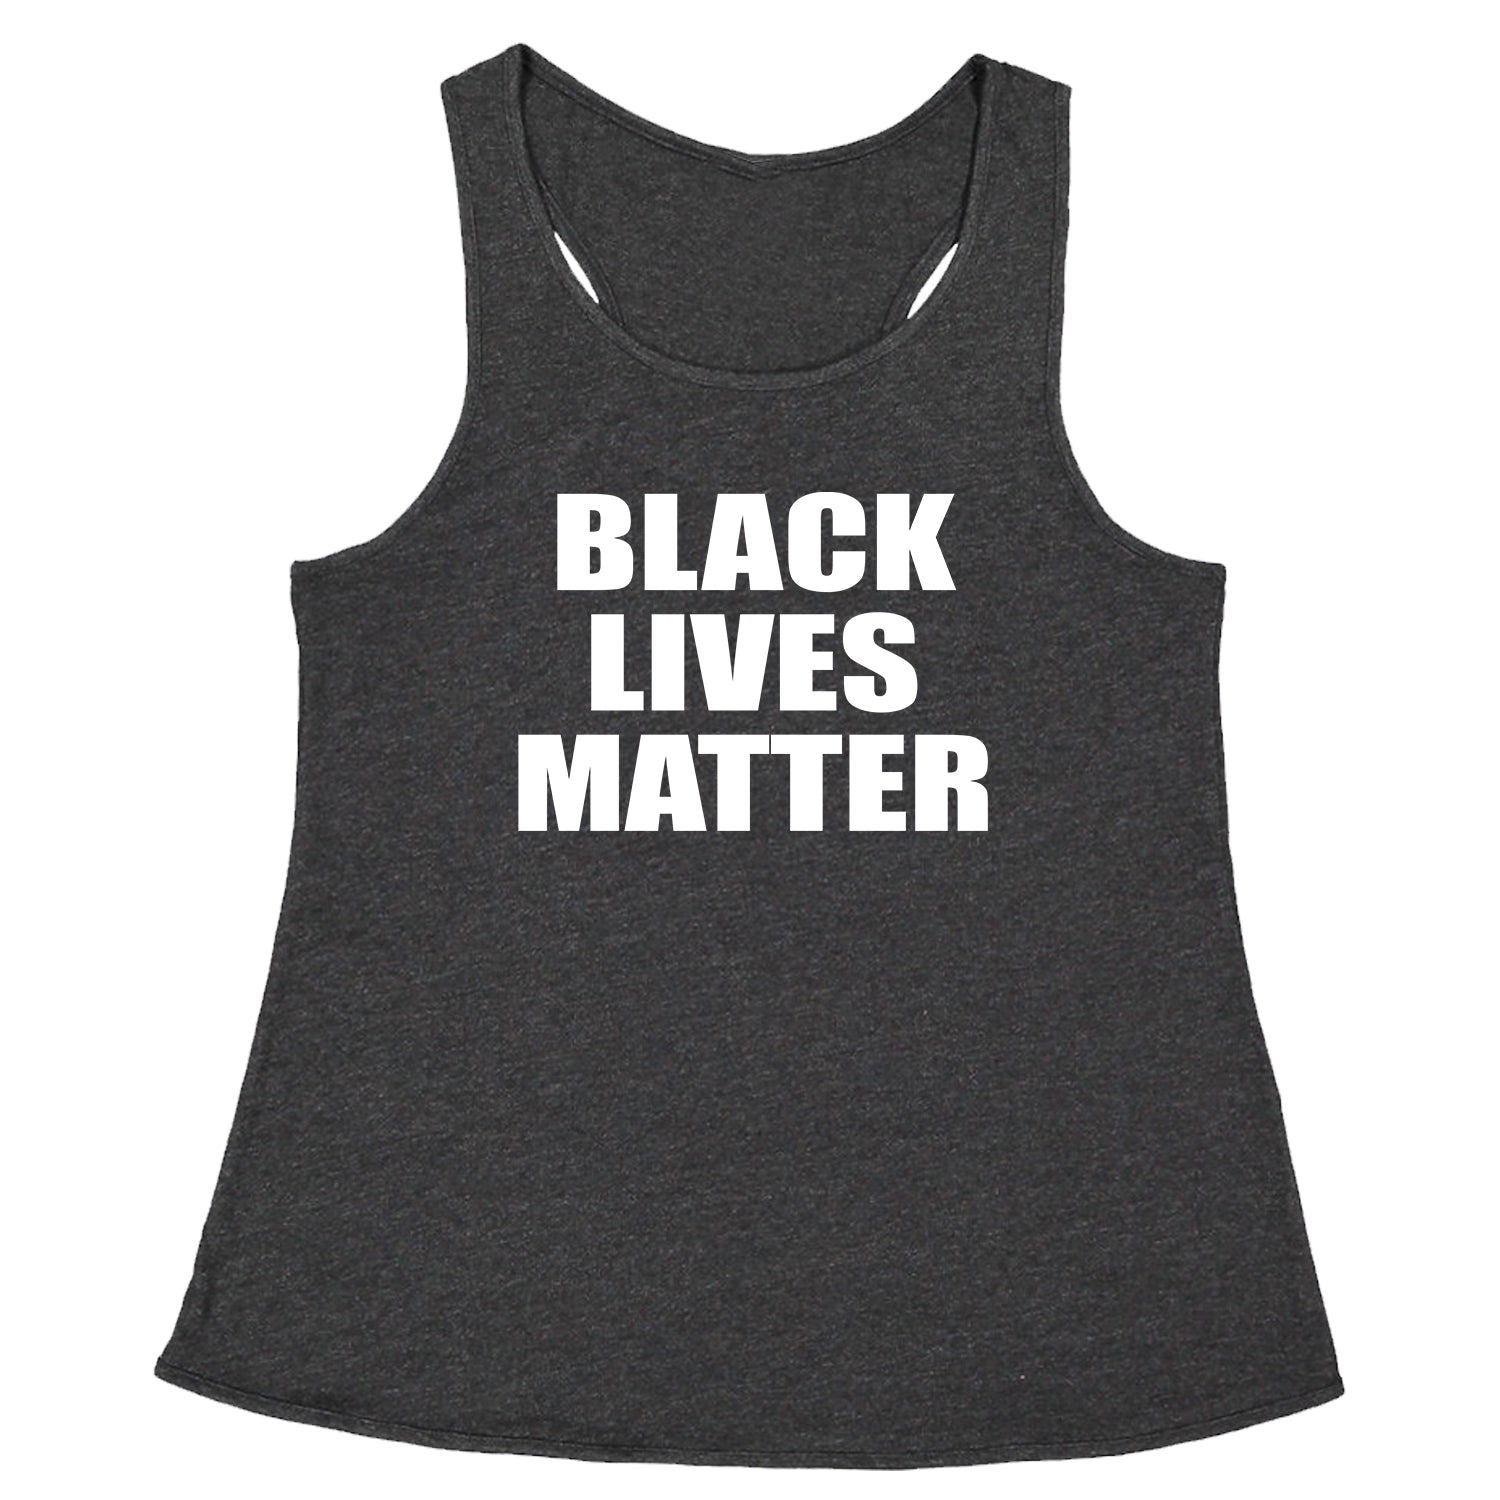 Black Lives Matter BLM Racerback Tank Top for Women african, africanamerican, ahmaud, american, arberry, breonna, brutality, end, justice, taylor by Expression Tees